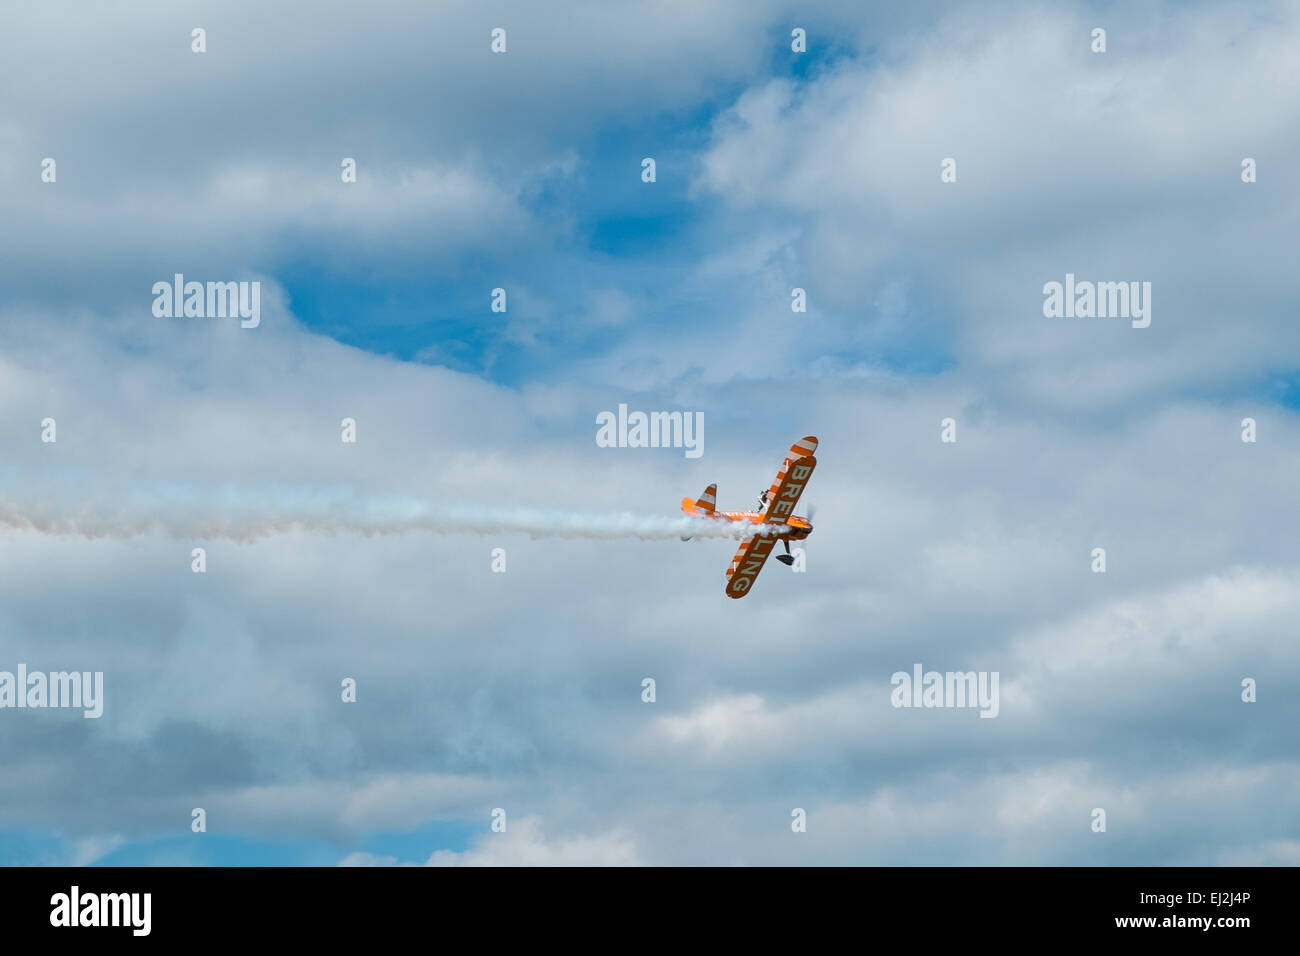 ASCOT, UK - AUGUST 16, 2014: Wing walking display at the Red Bull Air Race in Ascot, August 16, 2014. Stock Photo